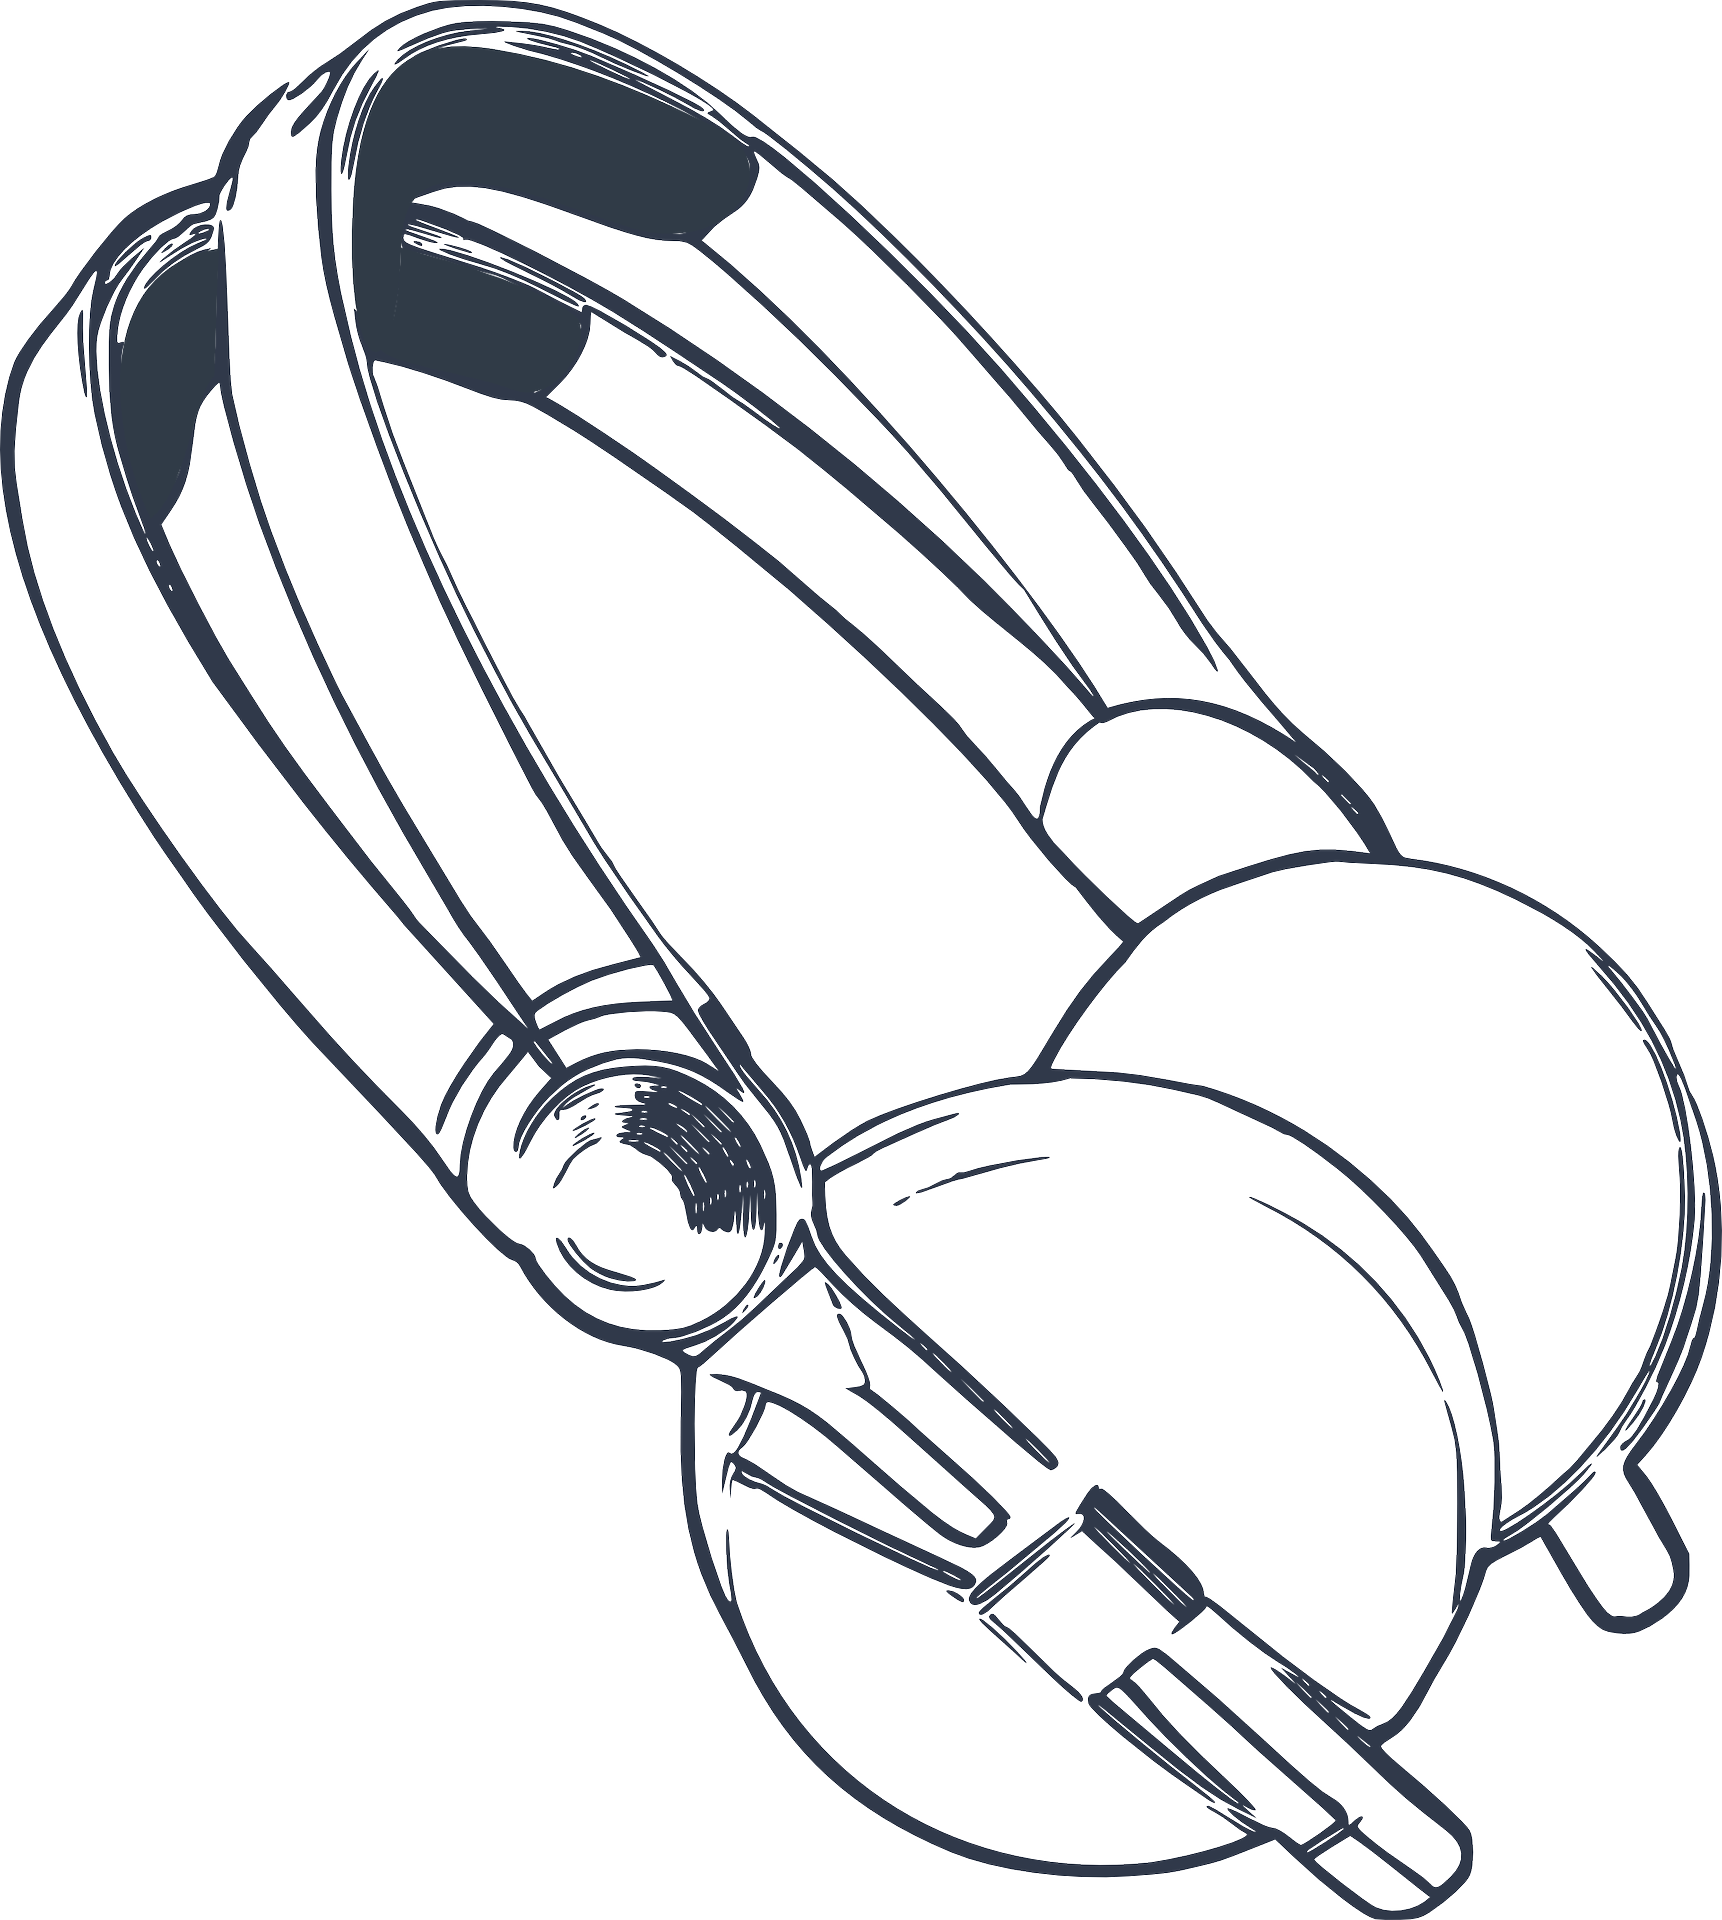 Drawing of the headphones clipart free image